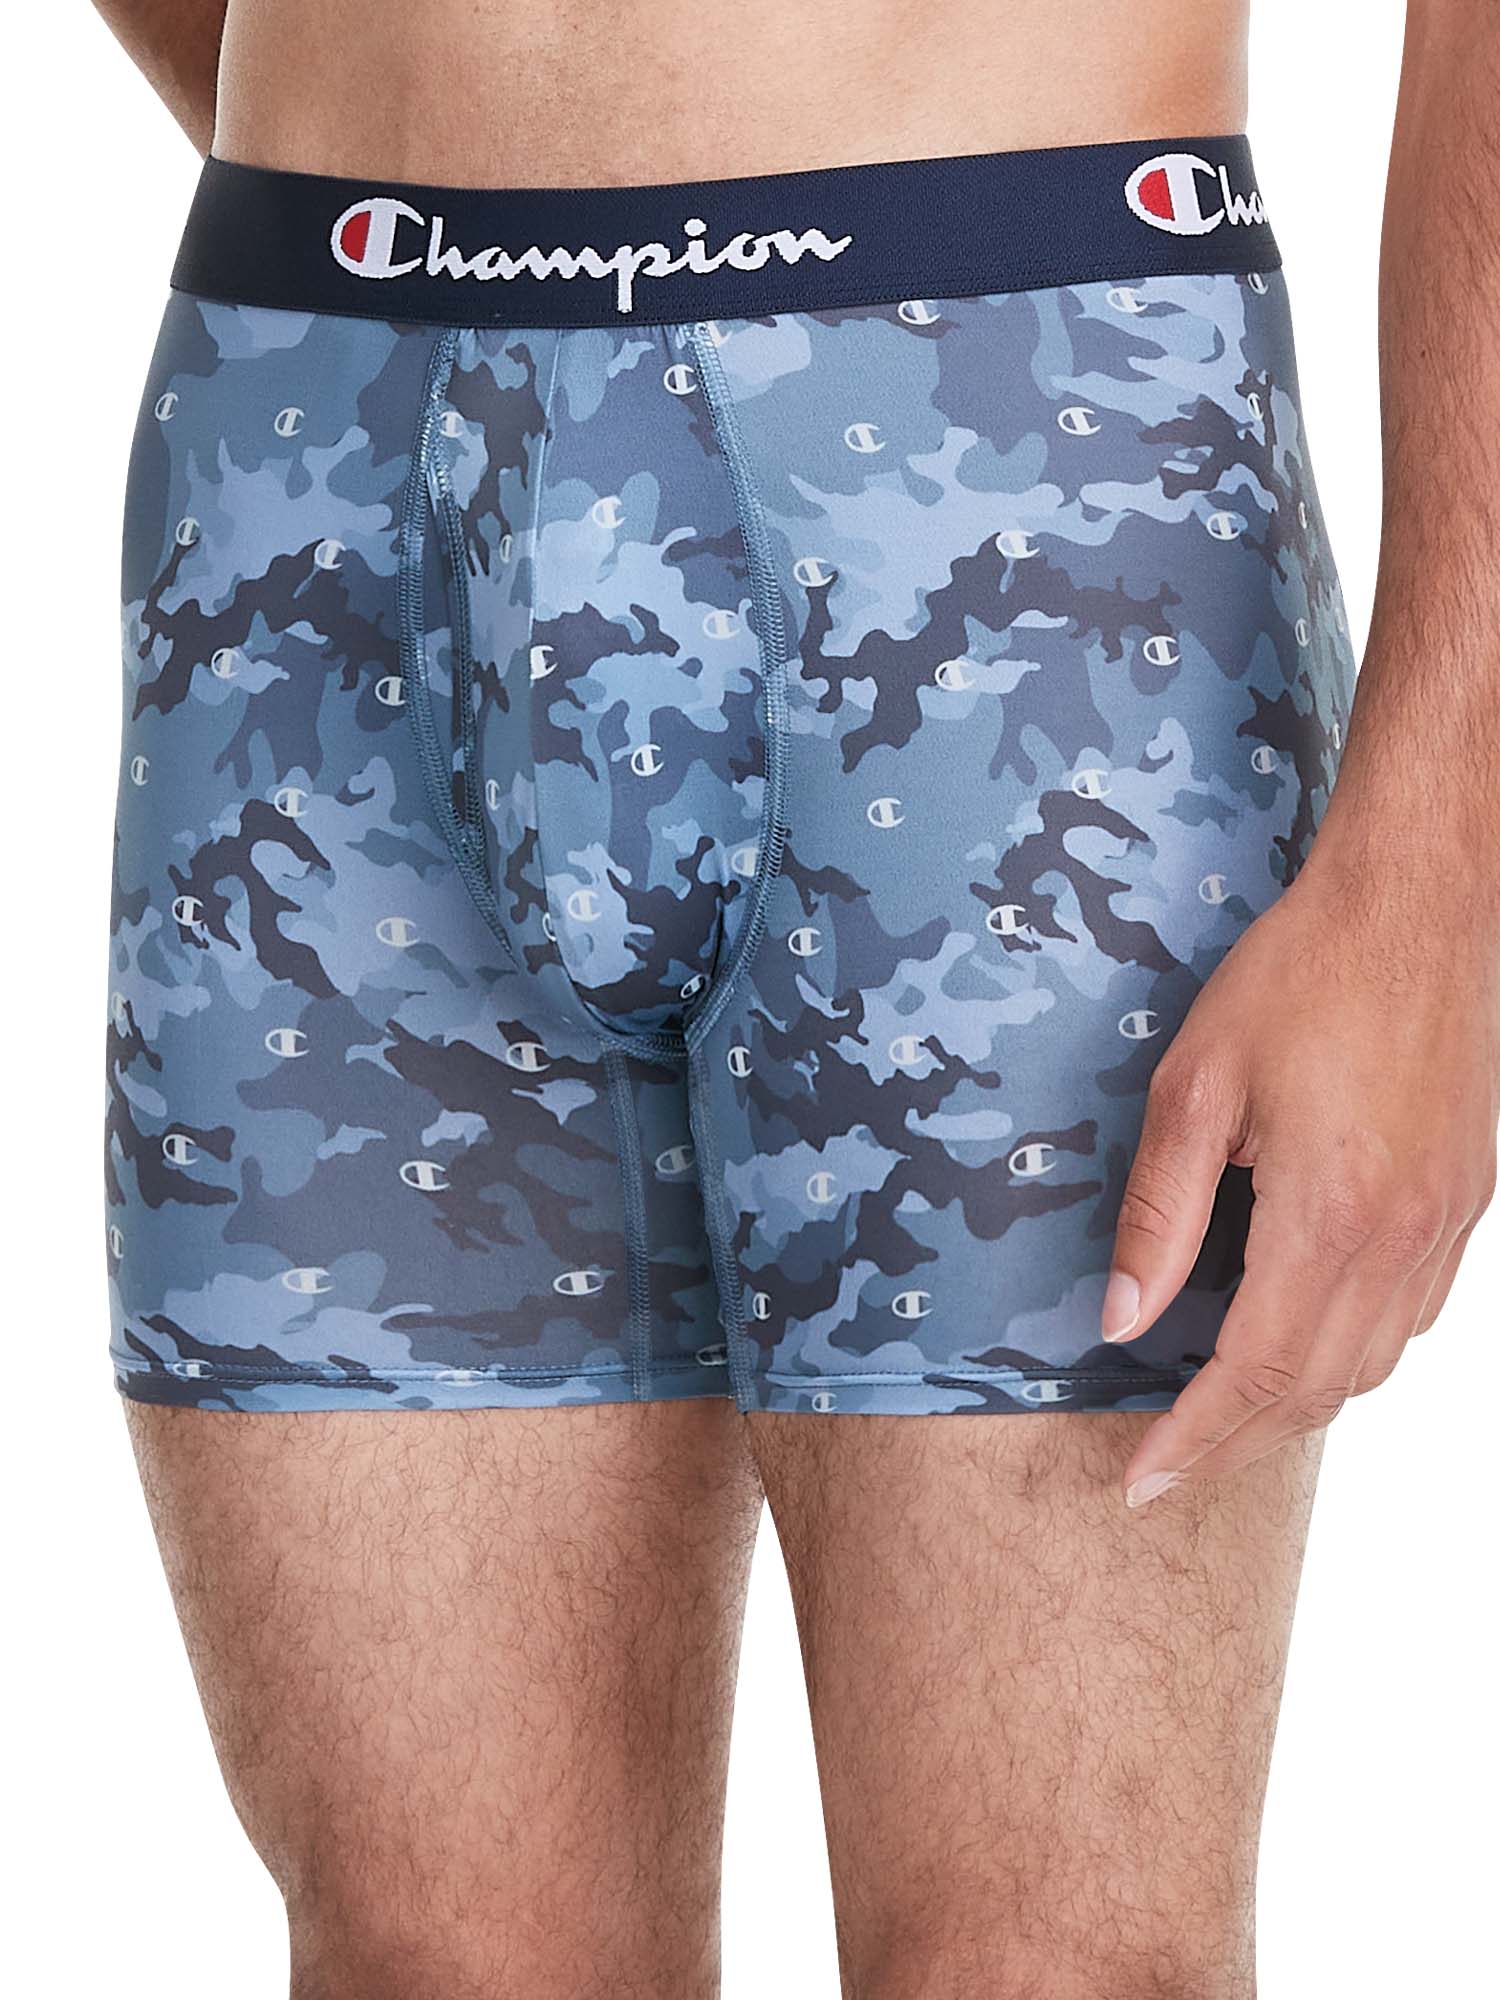 Champion Men's Lightweight Stretch Total Support Pouch Boxer Brief, 3 Pack - image 2 of 7